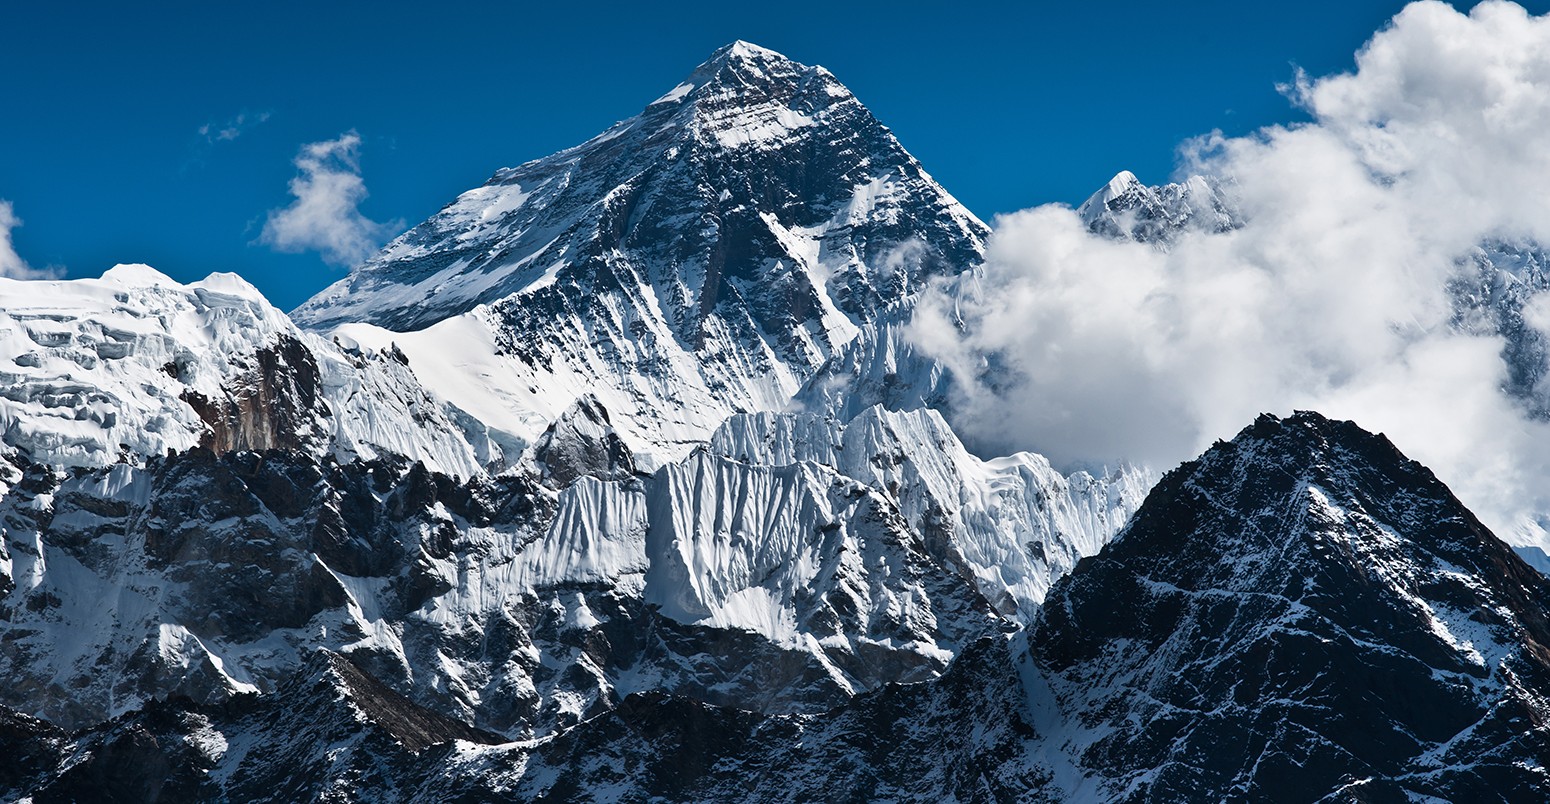 Only People With an IQ Over 130 Can Get at Least 12/15 on This General Knowledge Quiz Mount Everest